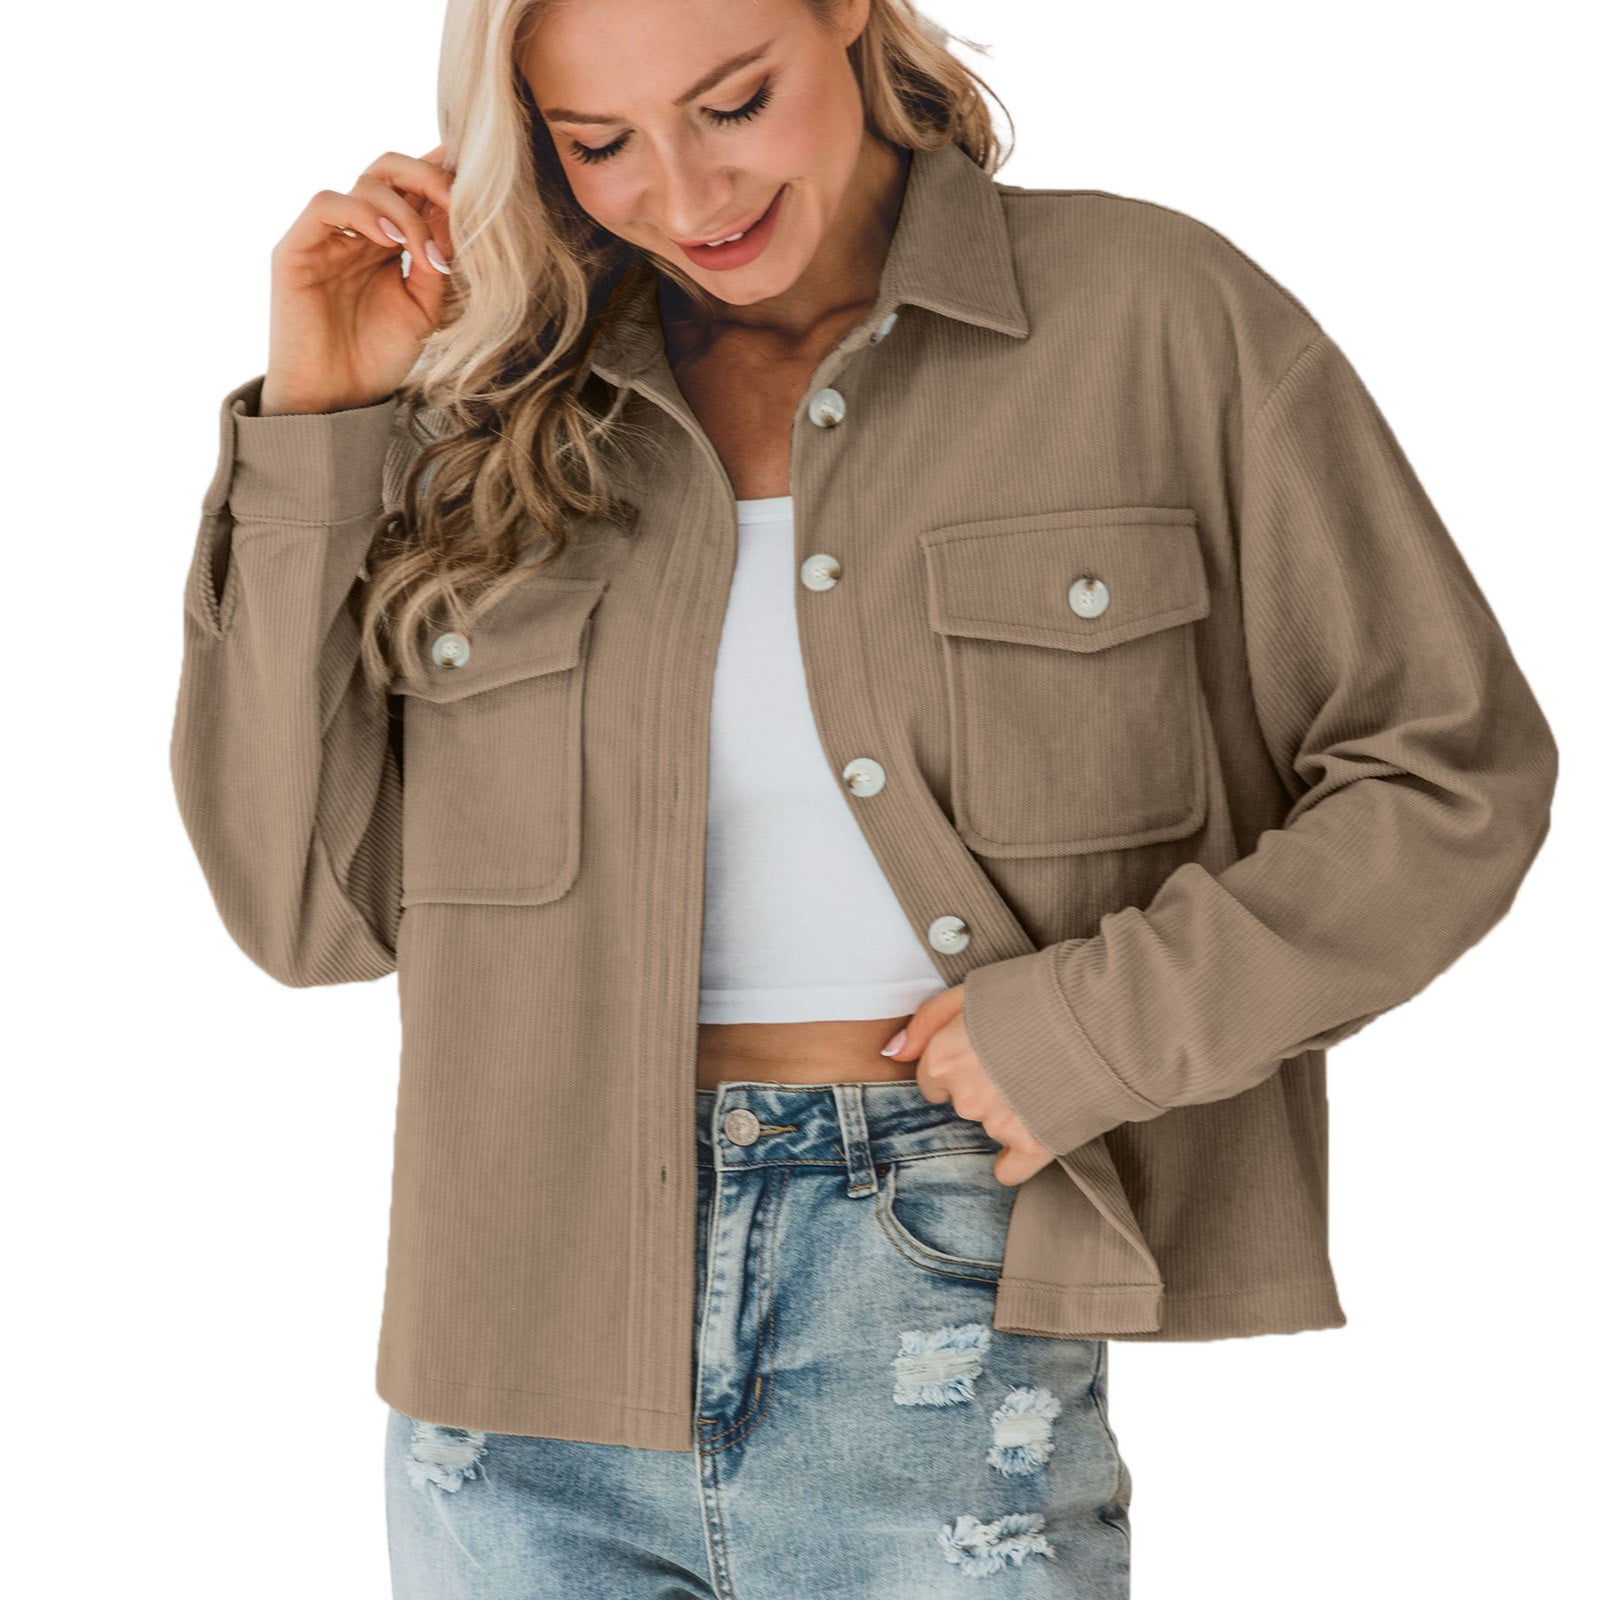 HSMQHJWE Womens Zip Up Jacket Business Jackets For Women Womens Casual  Cropped Corduroy Jackets Button Down Long Sleeve Shirts Jacket With Pockets